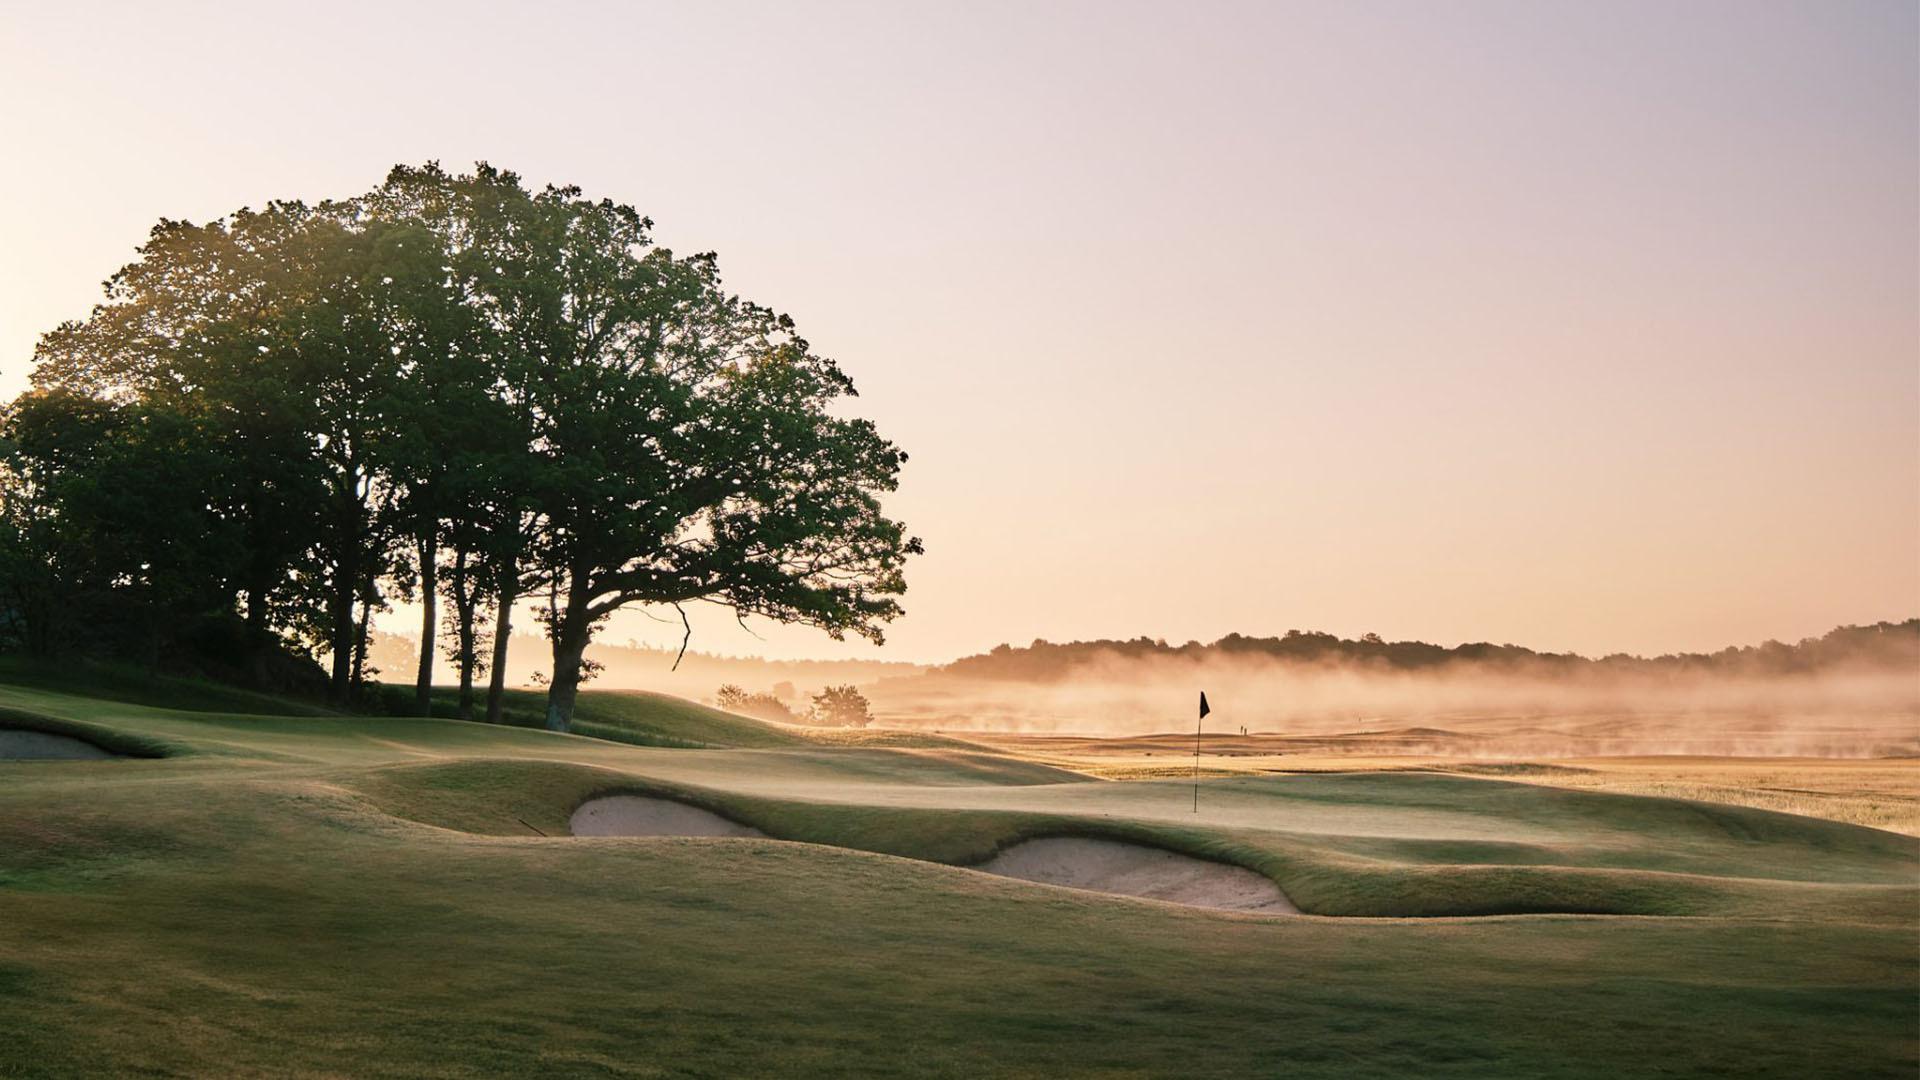 Golf course during a misty morning with a fairway, bunker, putting green, and also some trees.